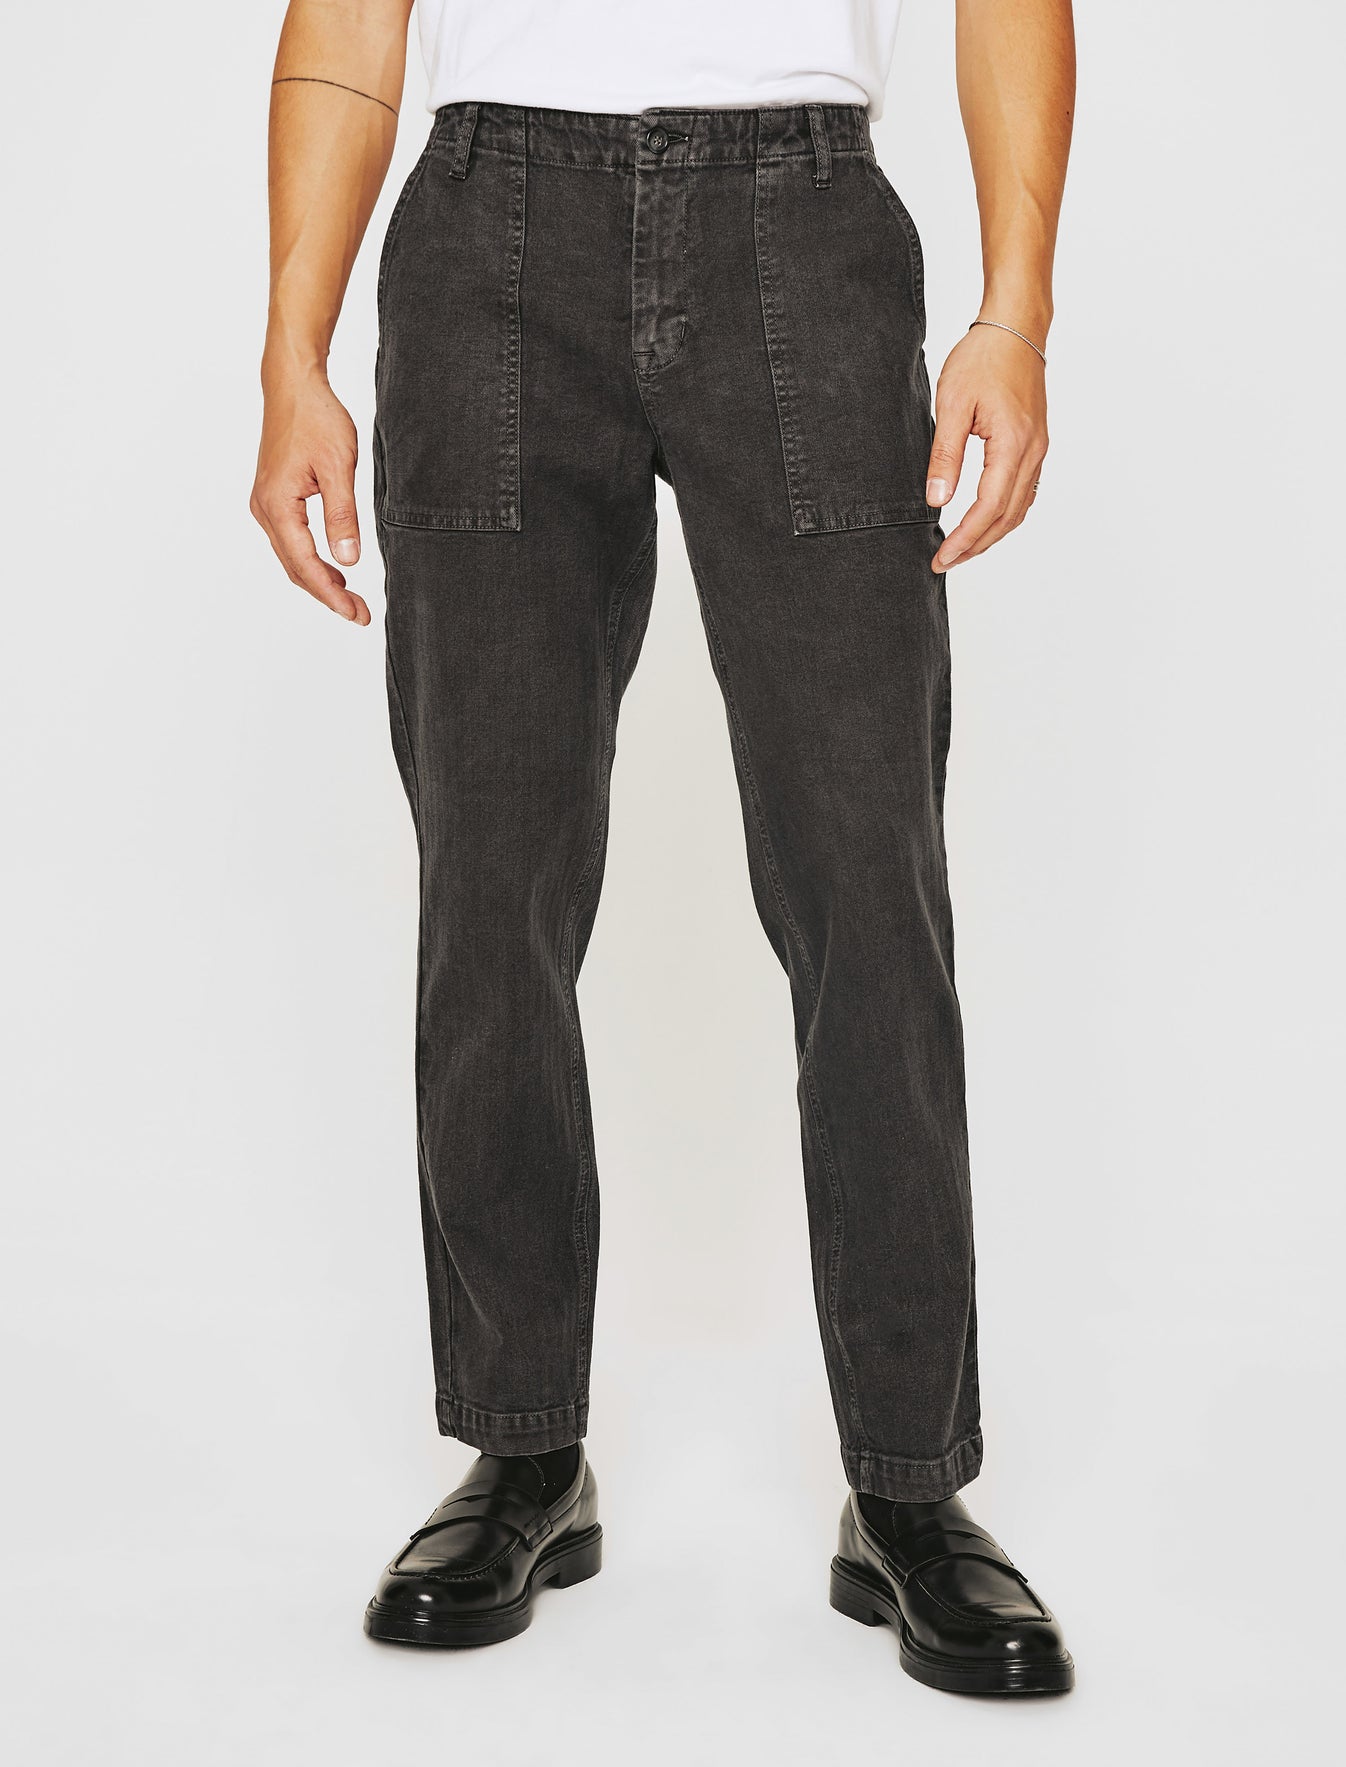 Wells Fatigue|Relaxed Tapered